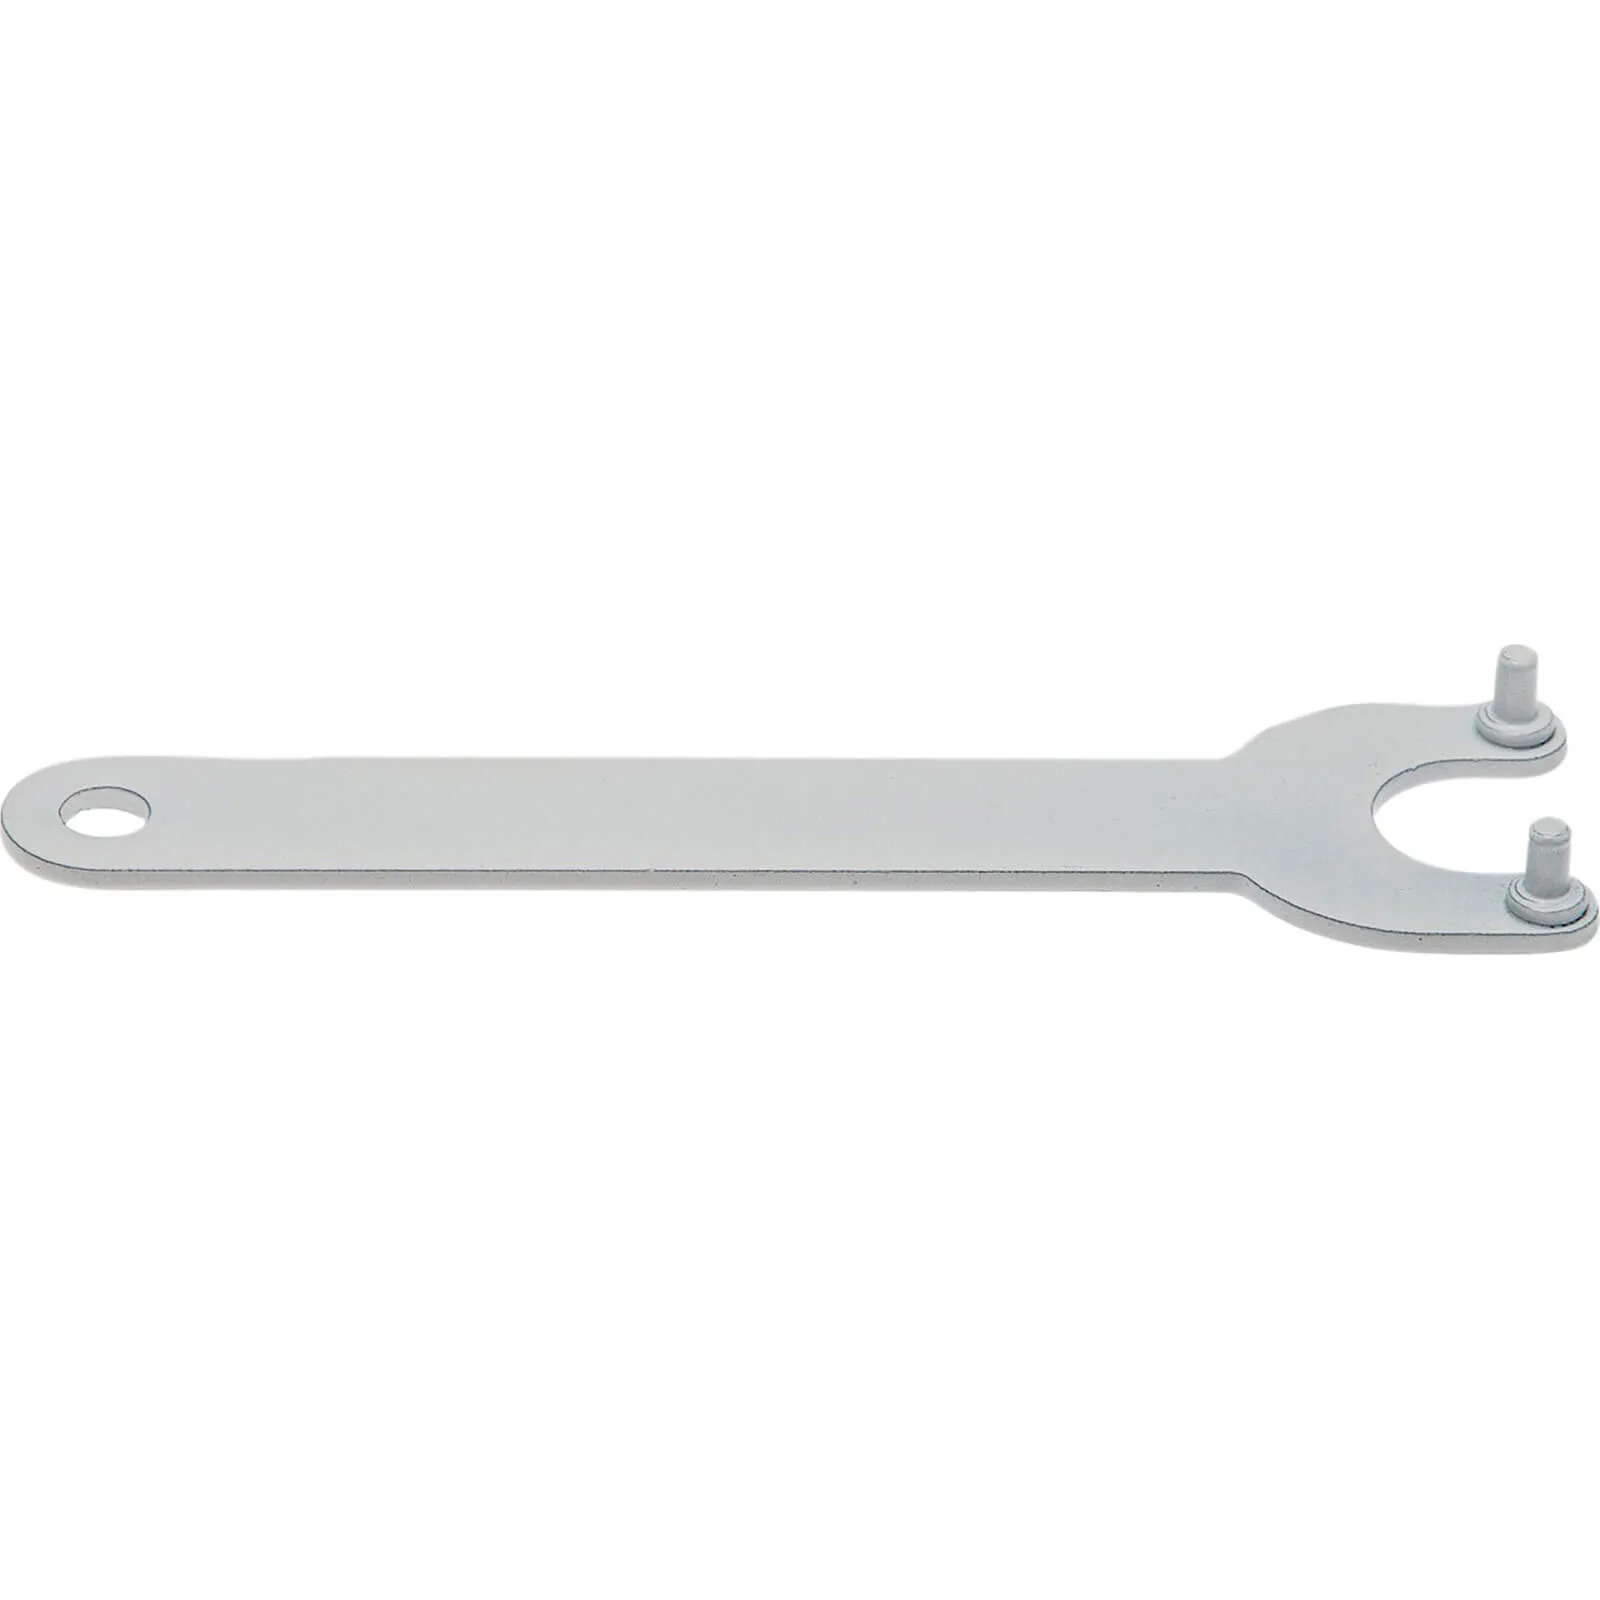 Flexipads 30-4 White Angle Grinder Pin Spanner